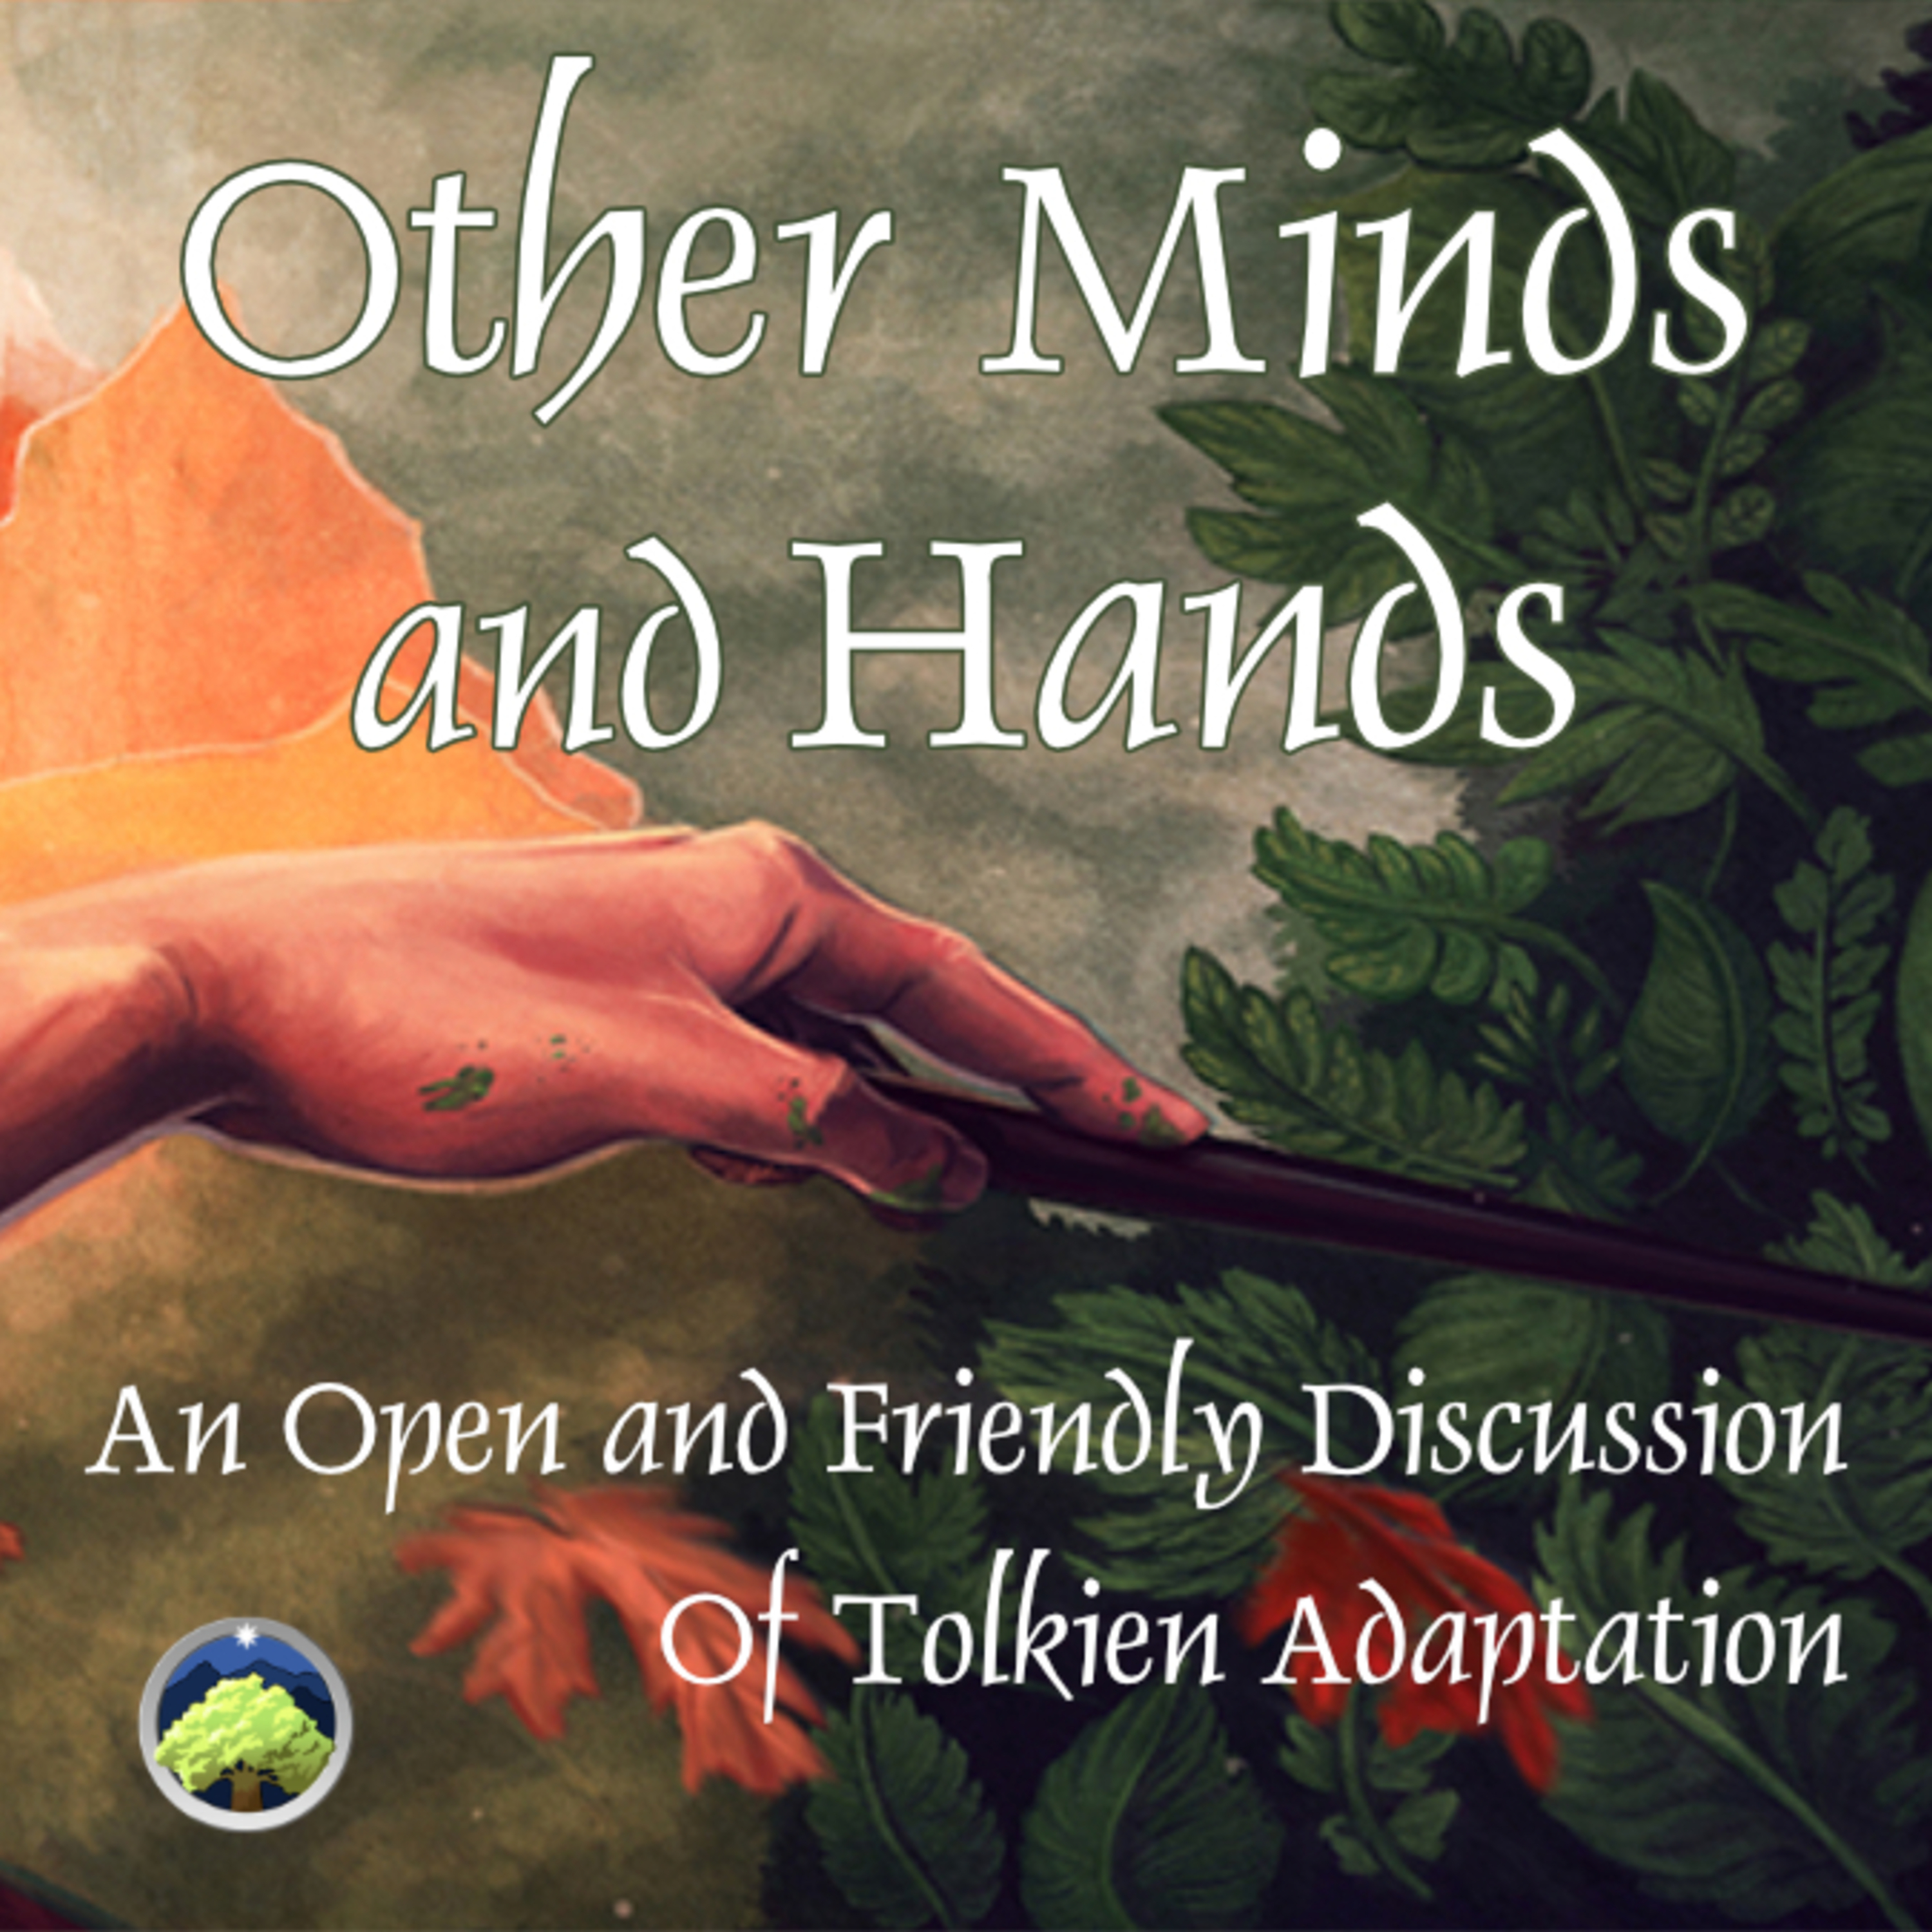 543: Other Minds and Hands, Episode 53